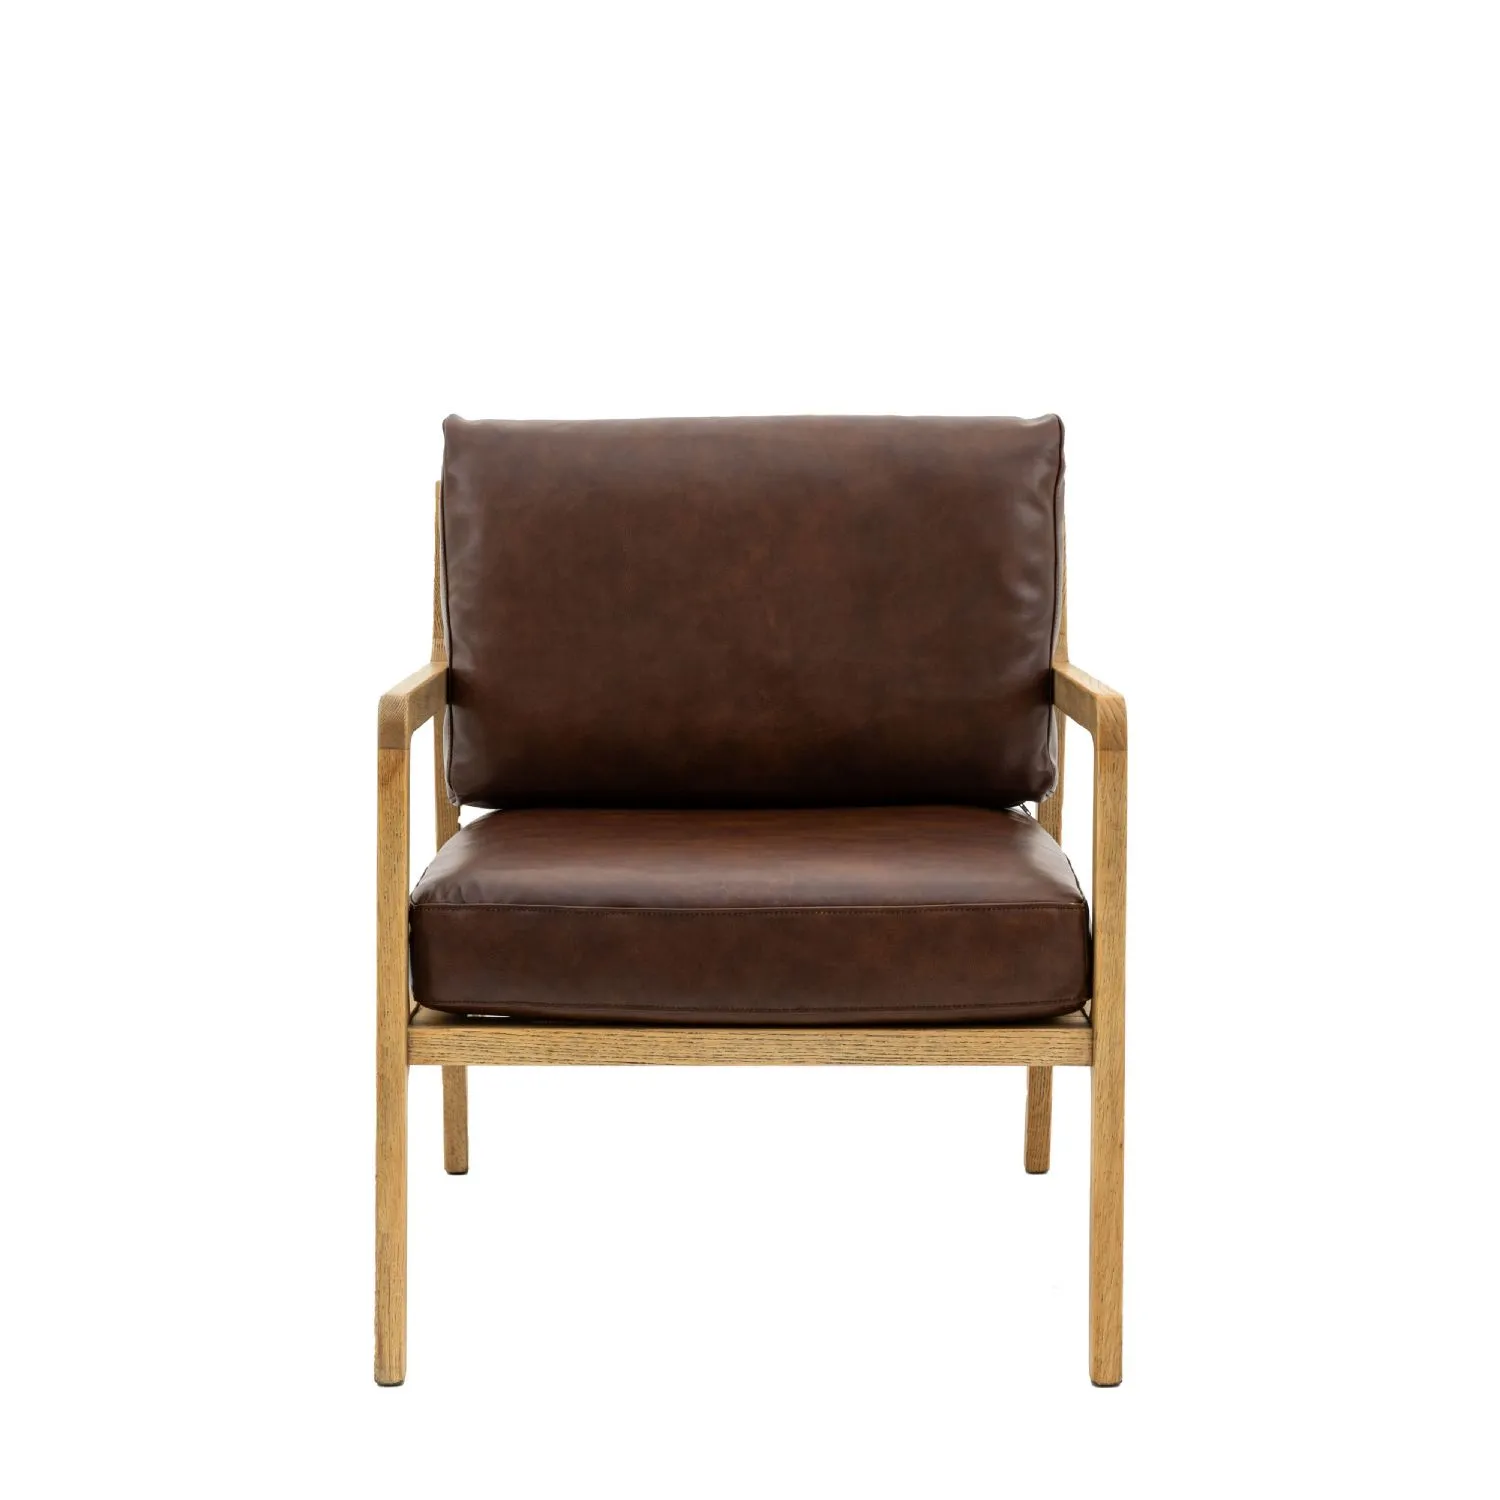 Armchair Antique Brown Leather